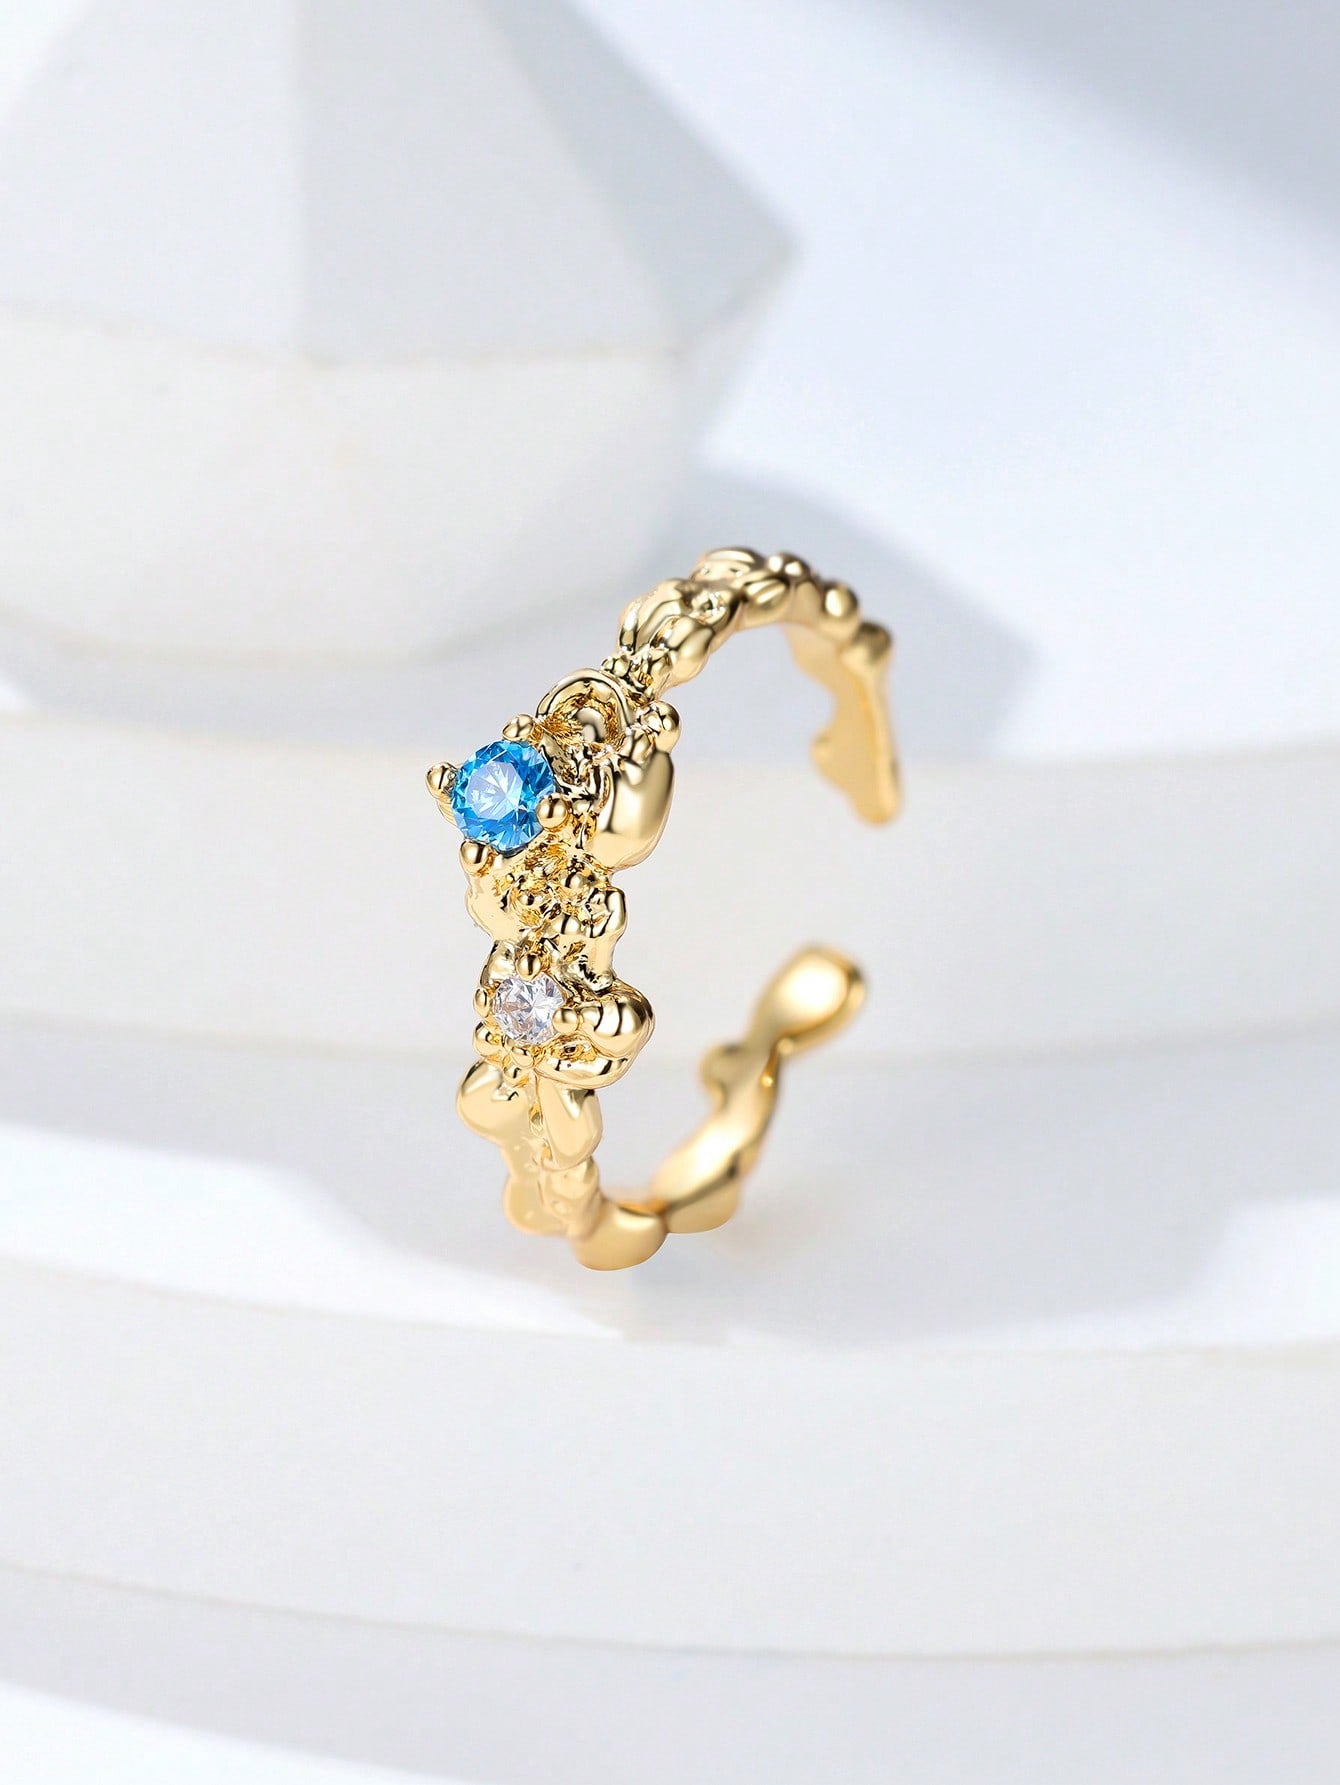 1pc Vintage Flower & Blue Cubic Zirconia Open Ring For Women, Party Jewelry